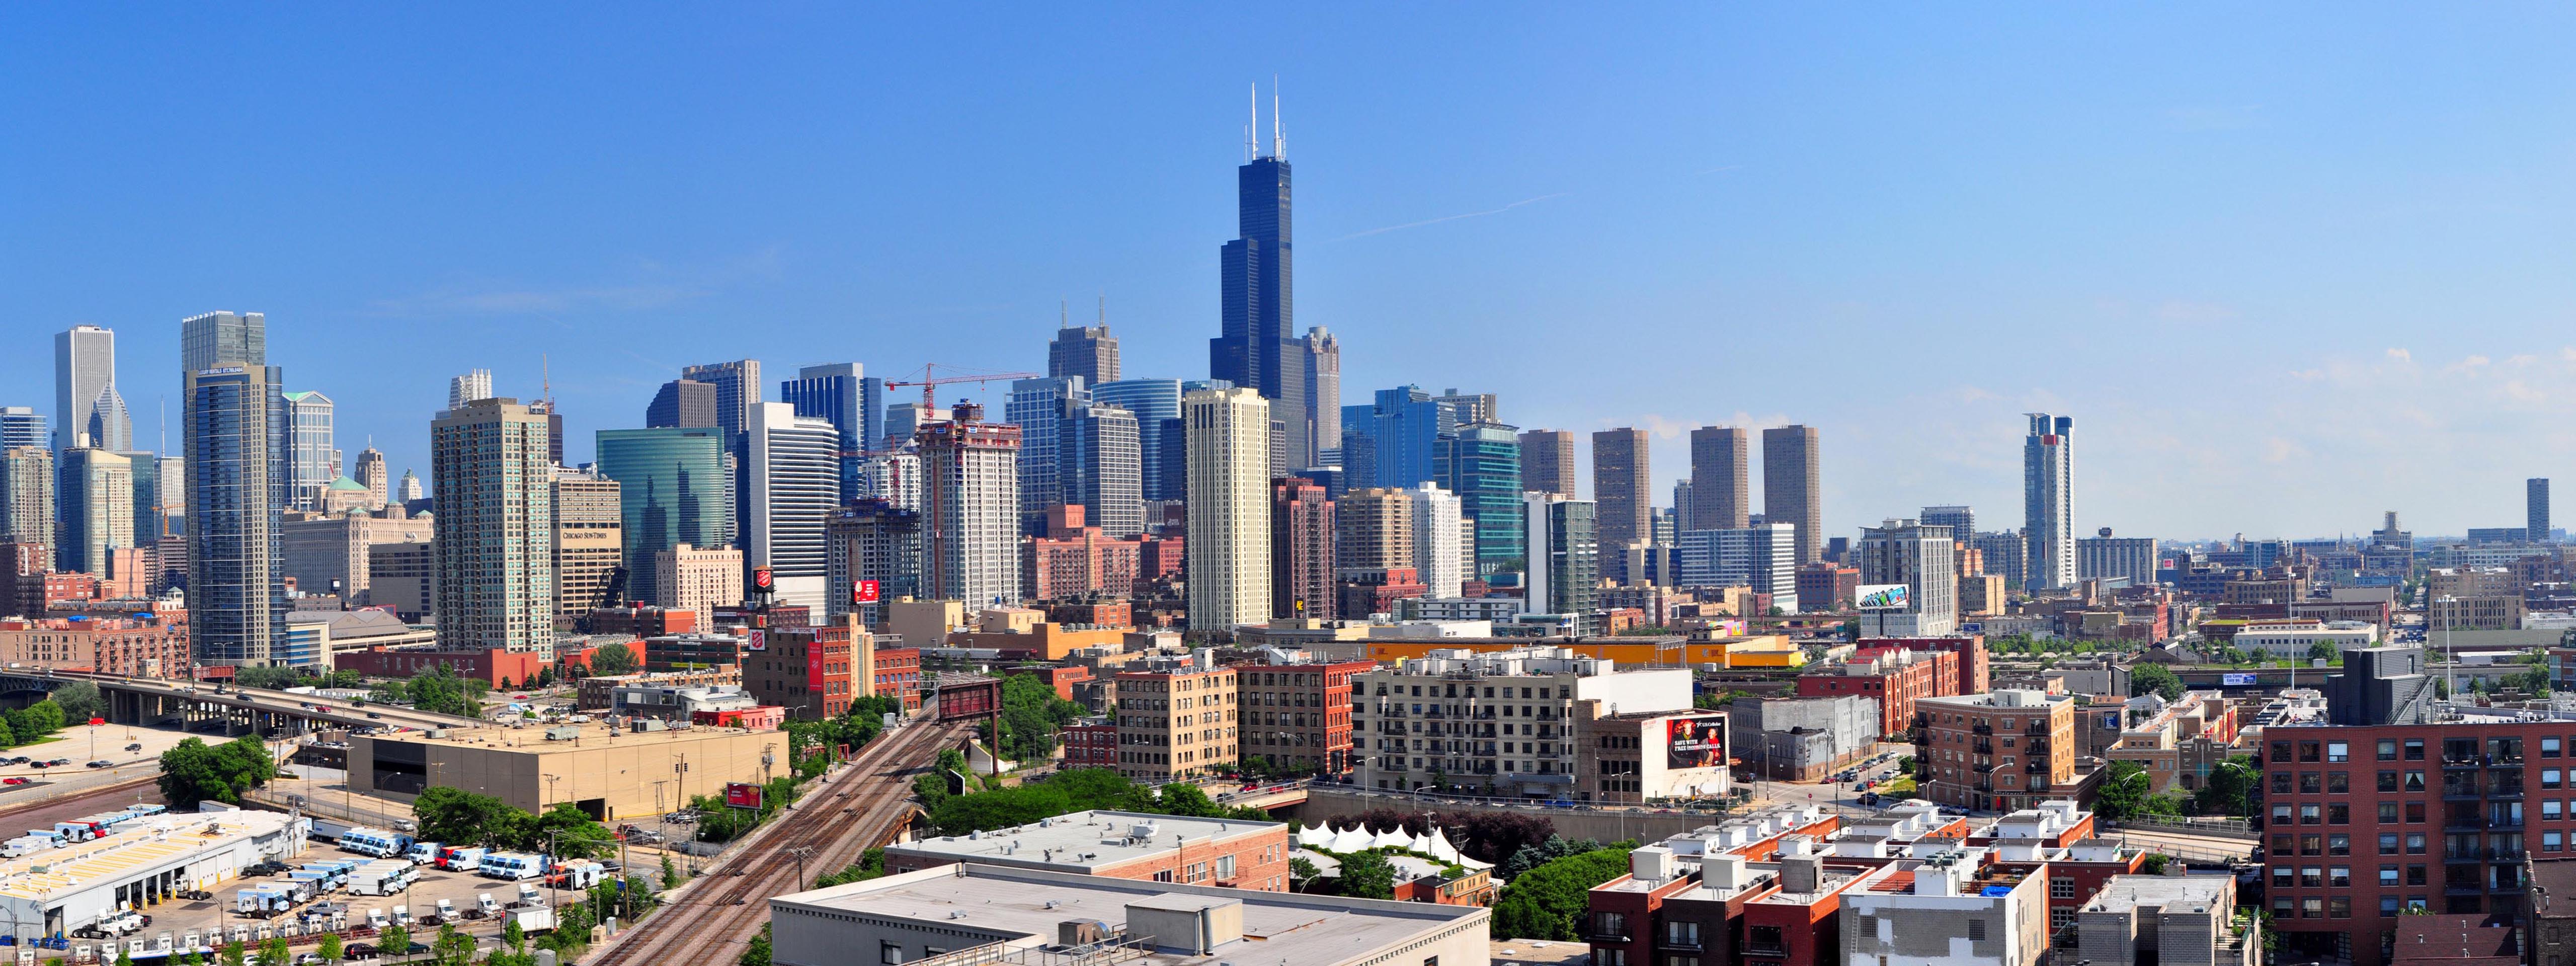 Chicago City Desktop Wallpaper For Widescreen HD And Mobile